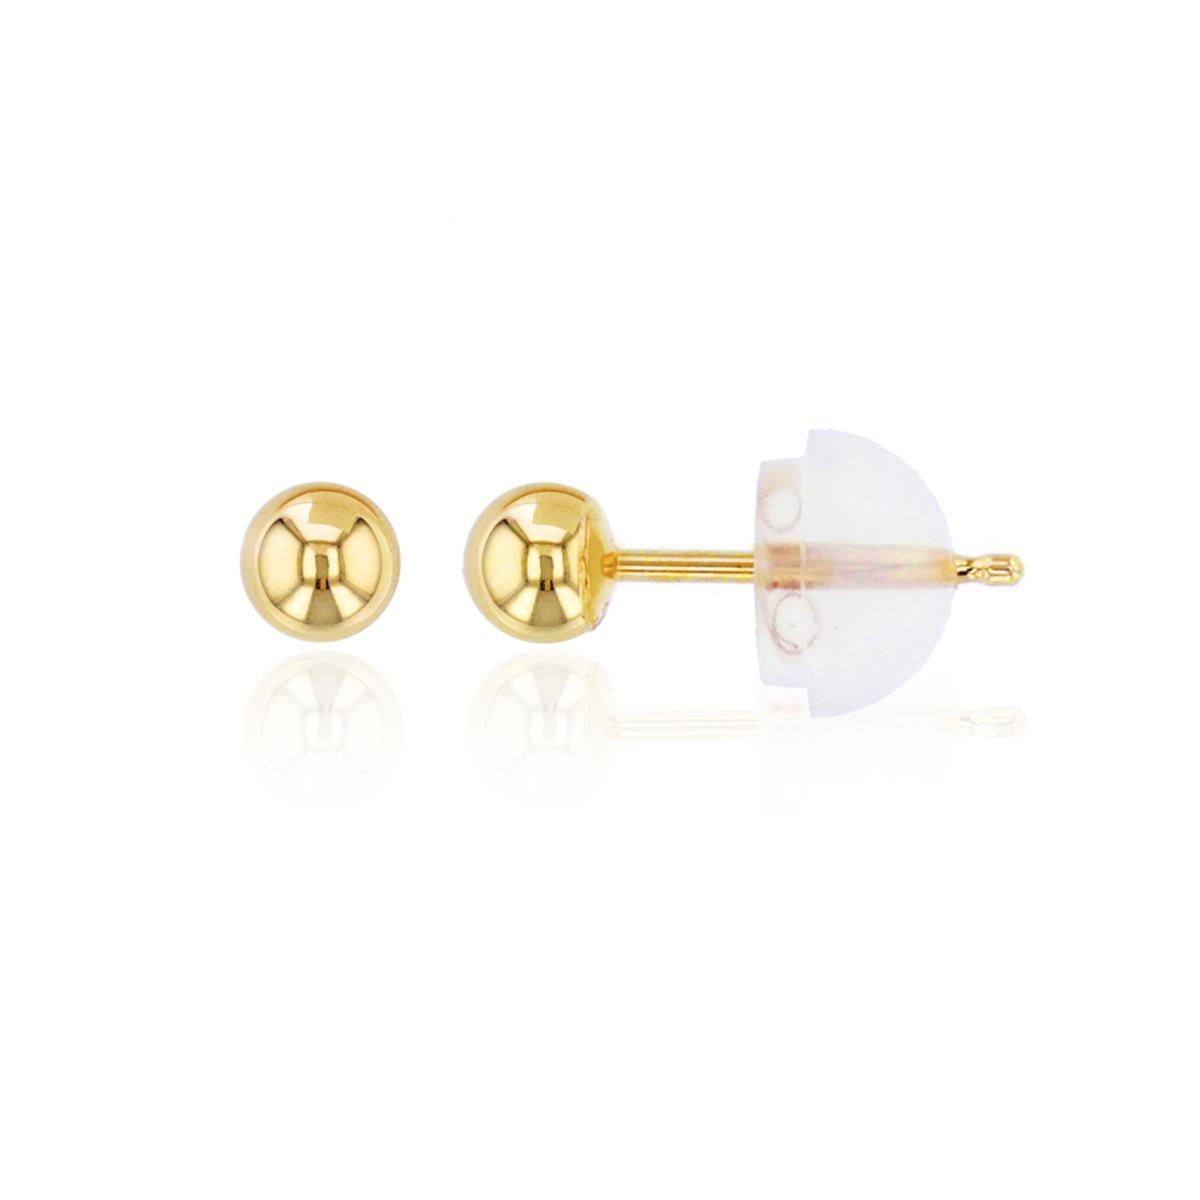 10K Yellow Gold 3mm HP Ball Post Stud Earring with Gold Silicone Backs